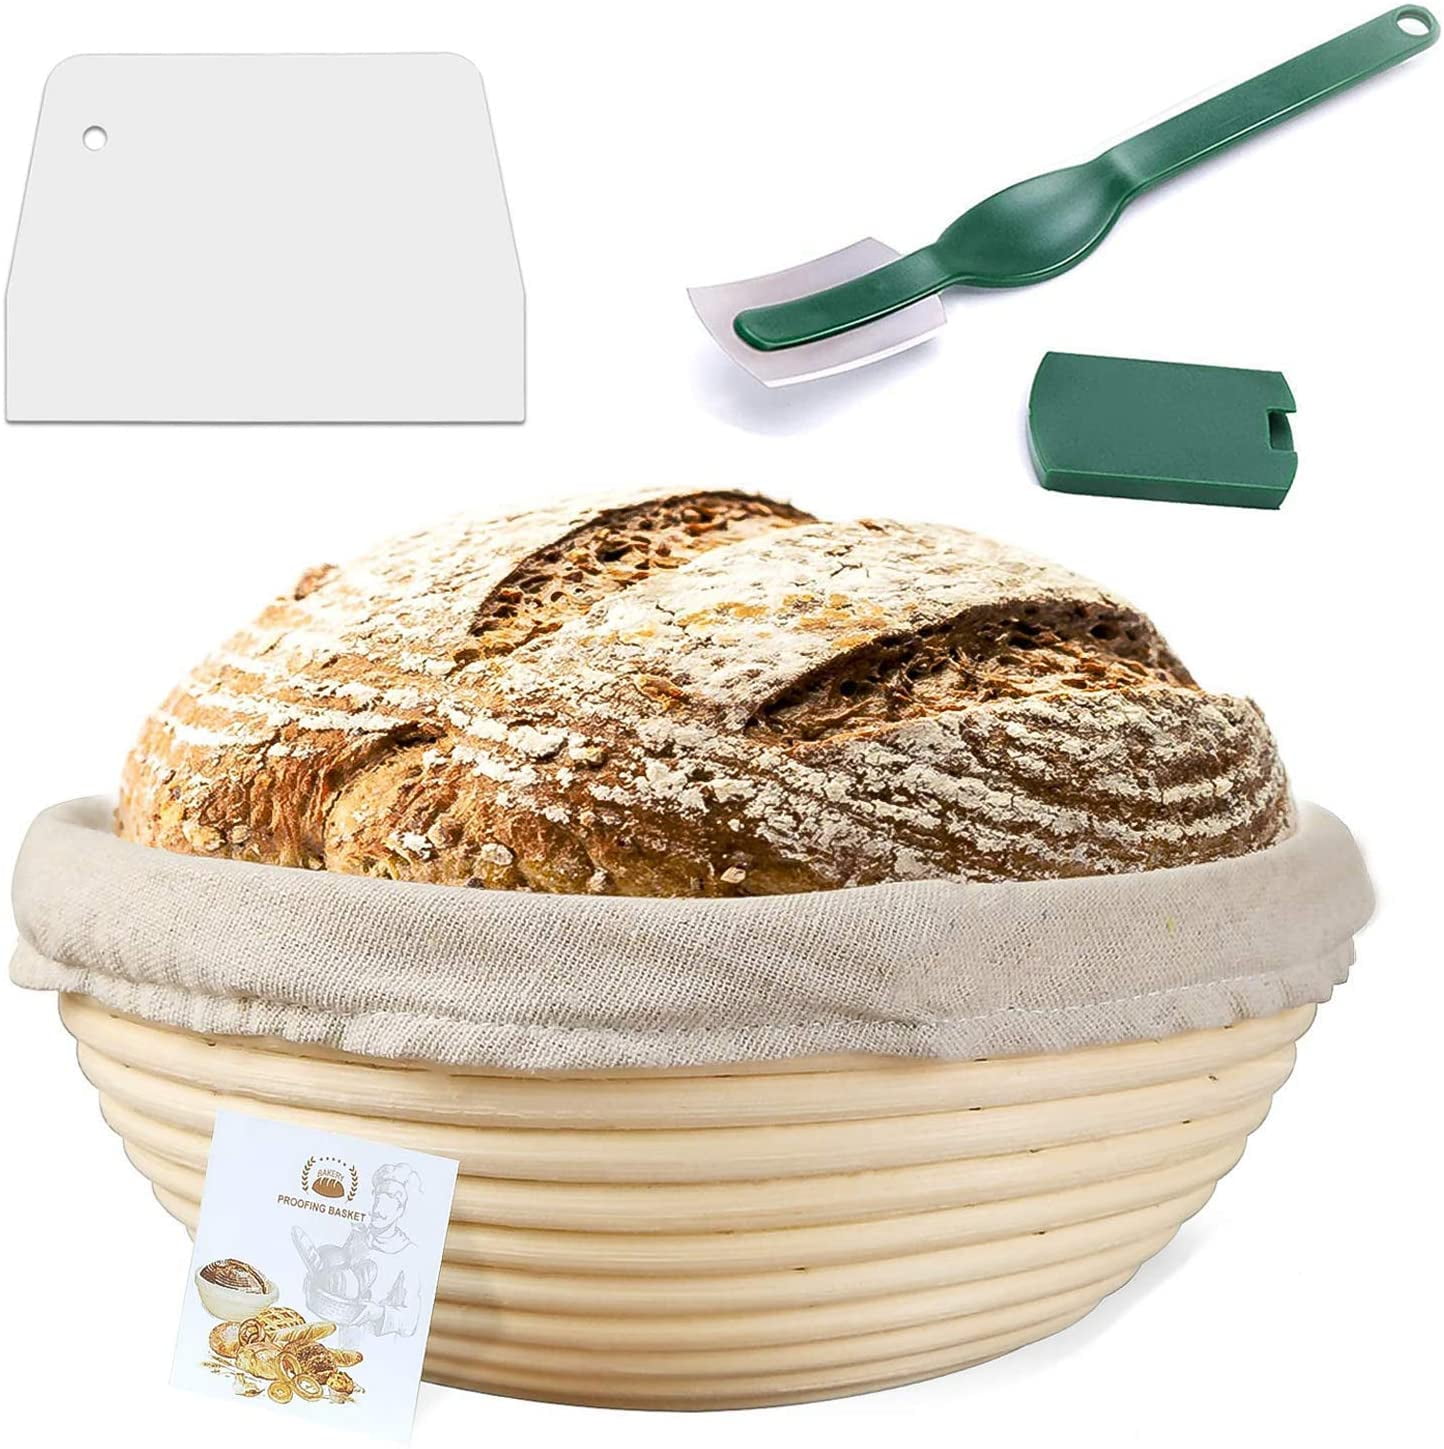 1PC Bread Proofing Basket, Sourdough Bread Baking Supplies Starter Kit,  Round And Oval Bread Making Tools, Bread Basket Gift Set